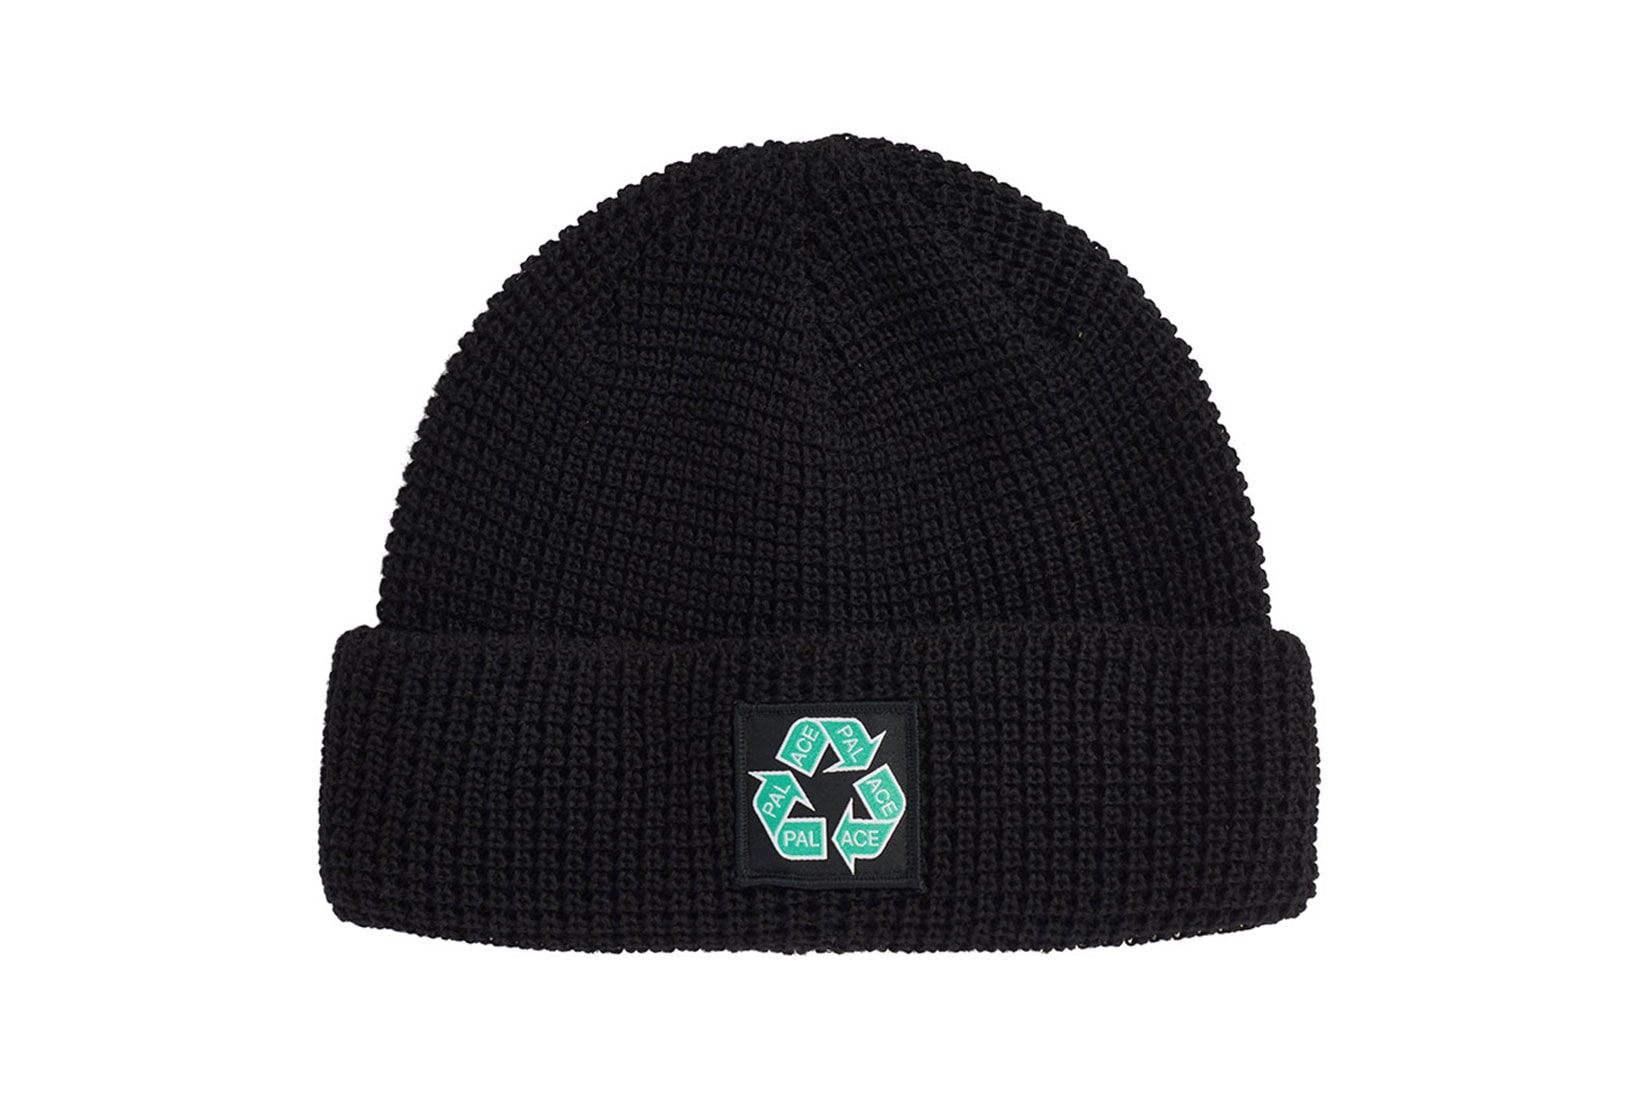 palace spring drop 4 collection logo beanie hat recycle